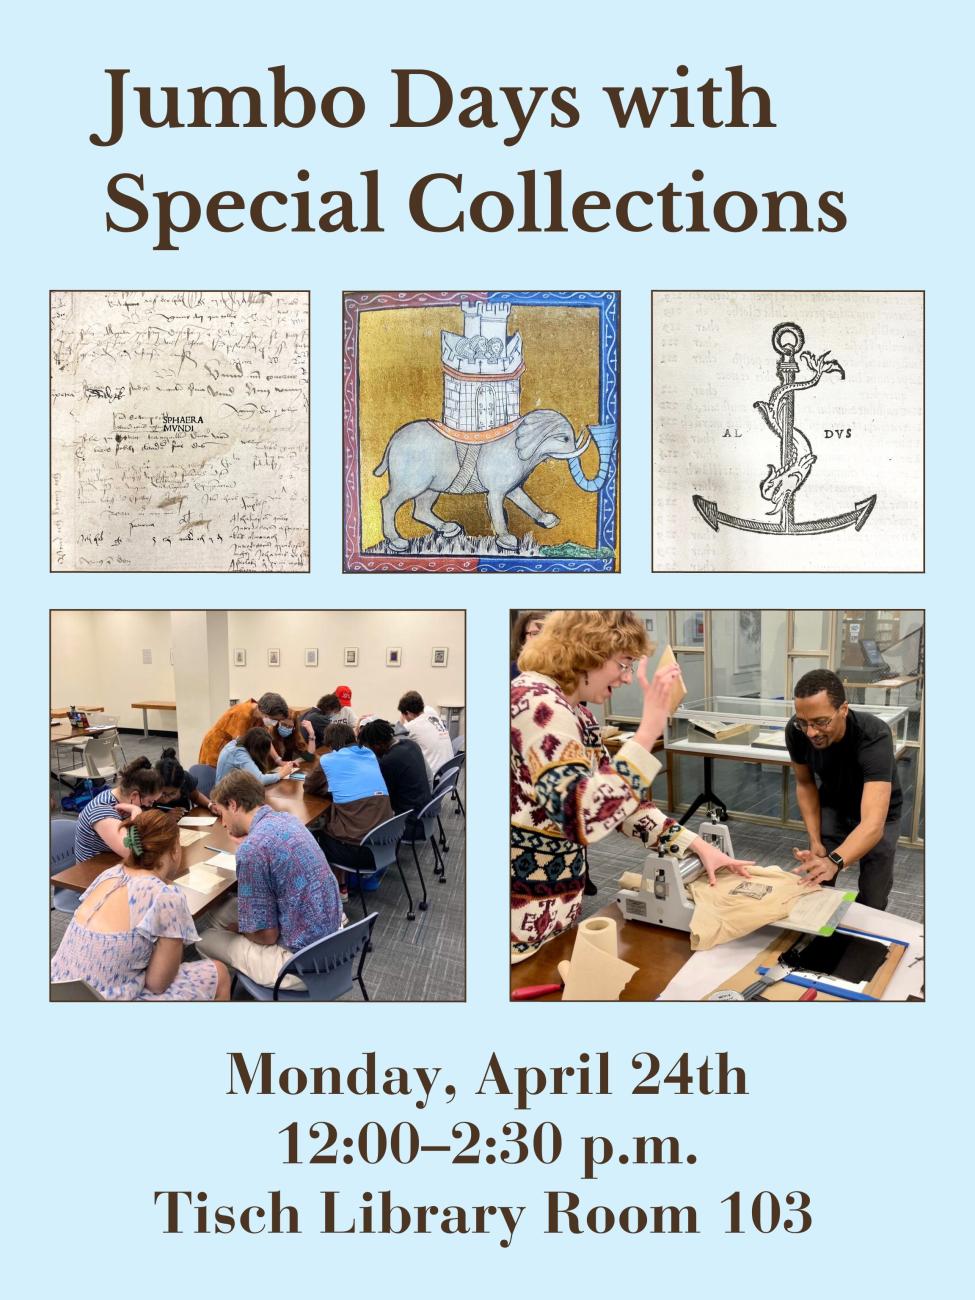 Jumbo Days with Special Collections on Monday, April 24th at 12:00-2:30 PM in Tisch Library Room 103